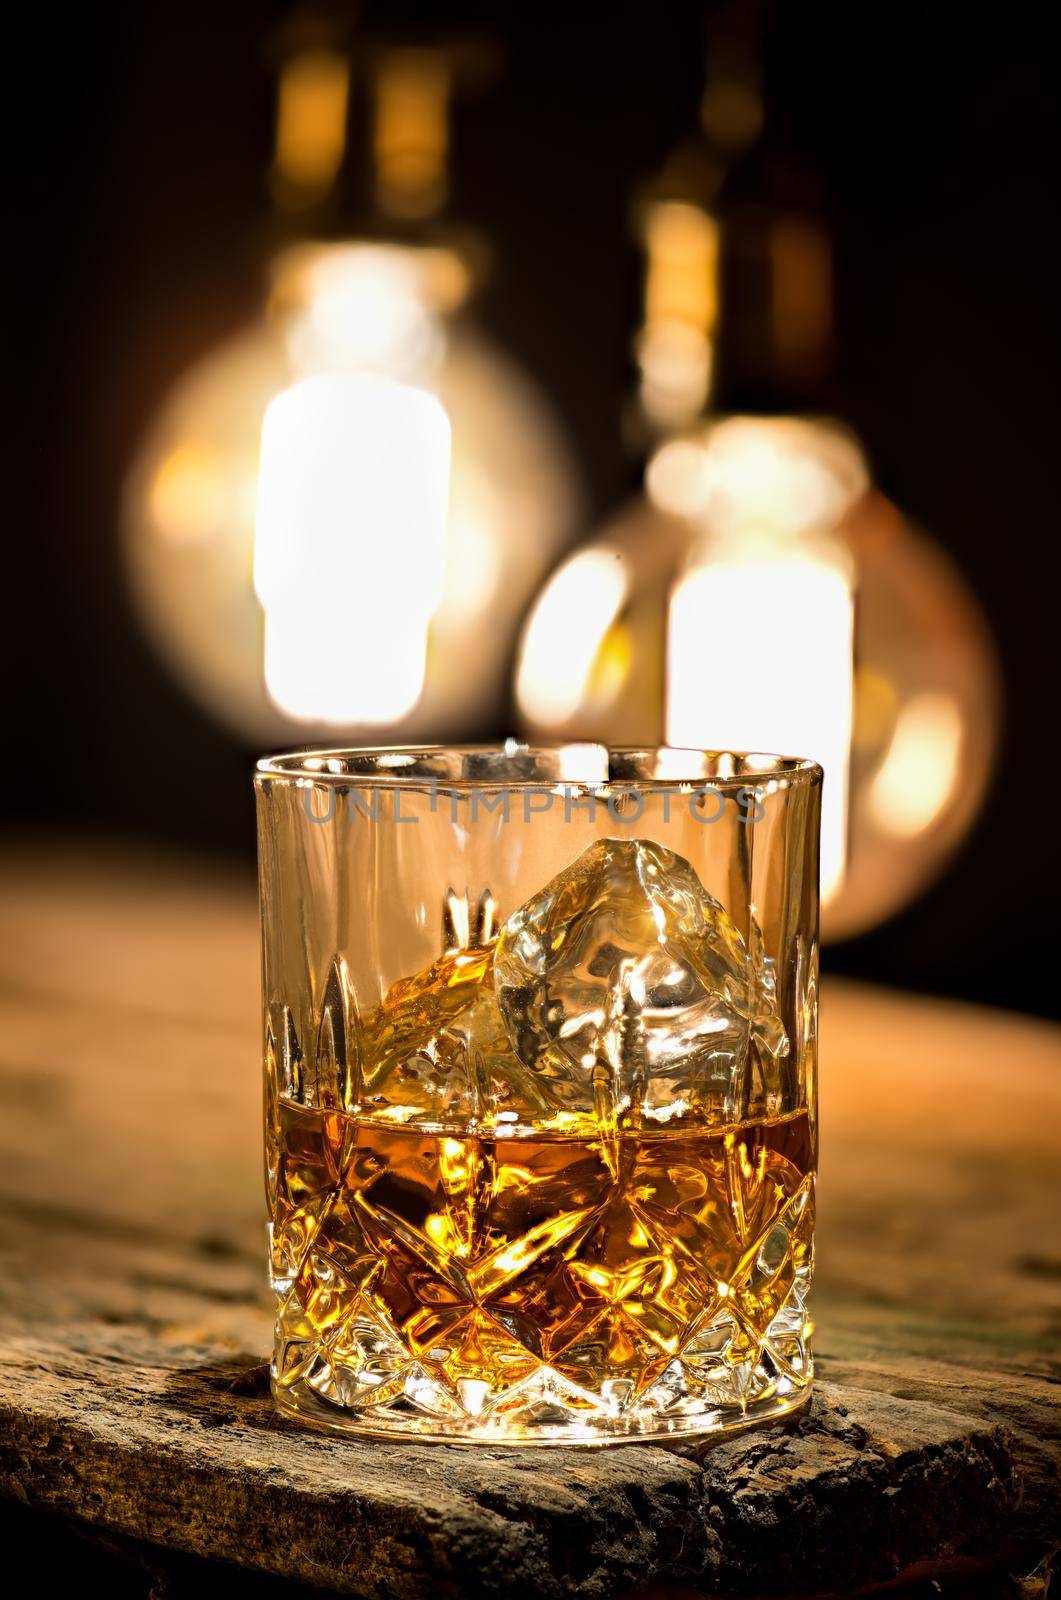 Whiskey and Edison lamps by Givaga